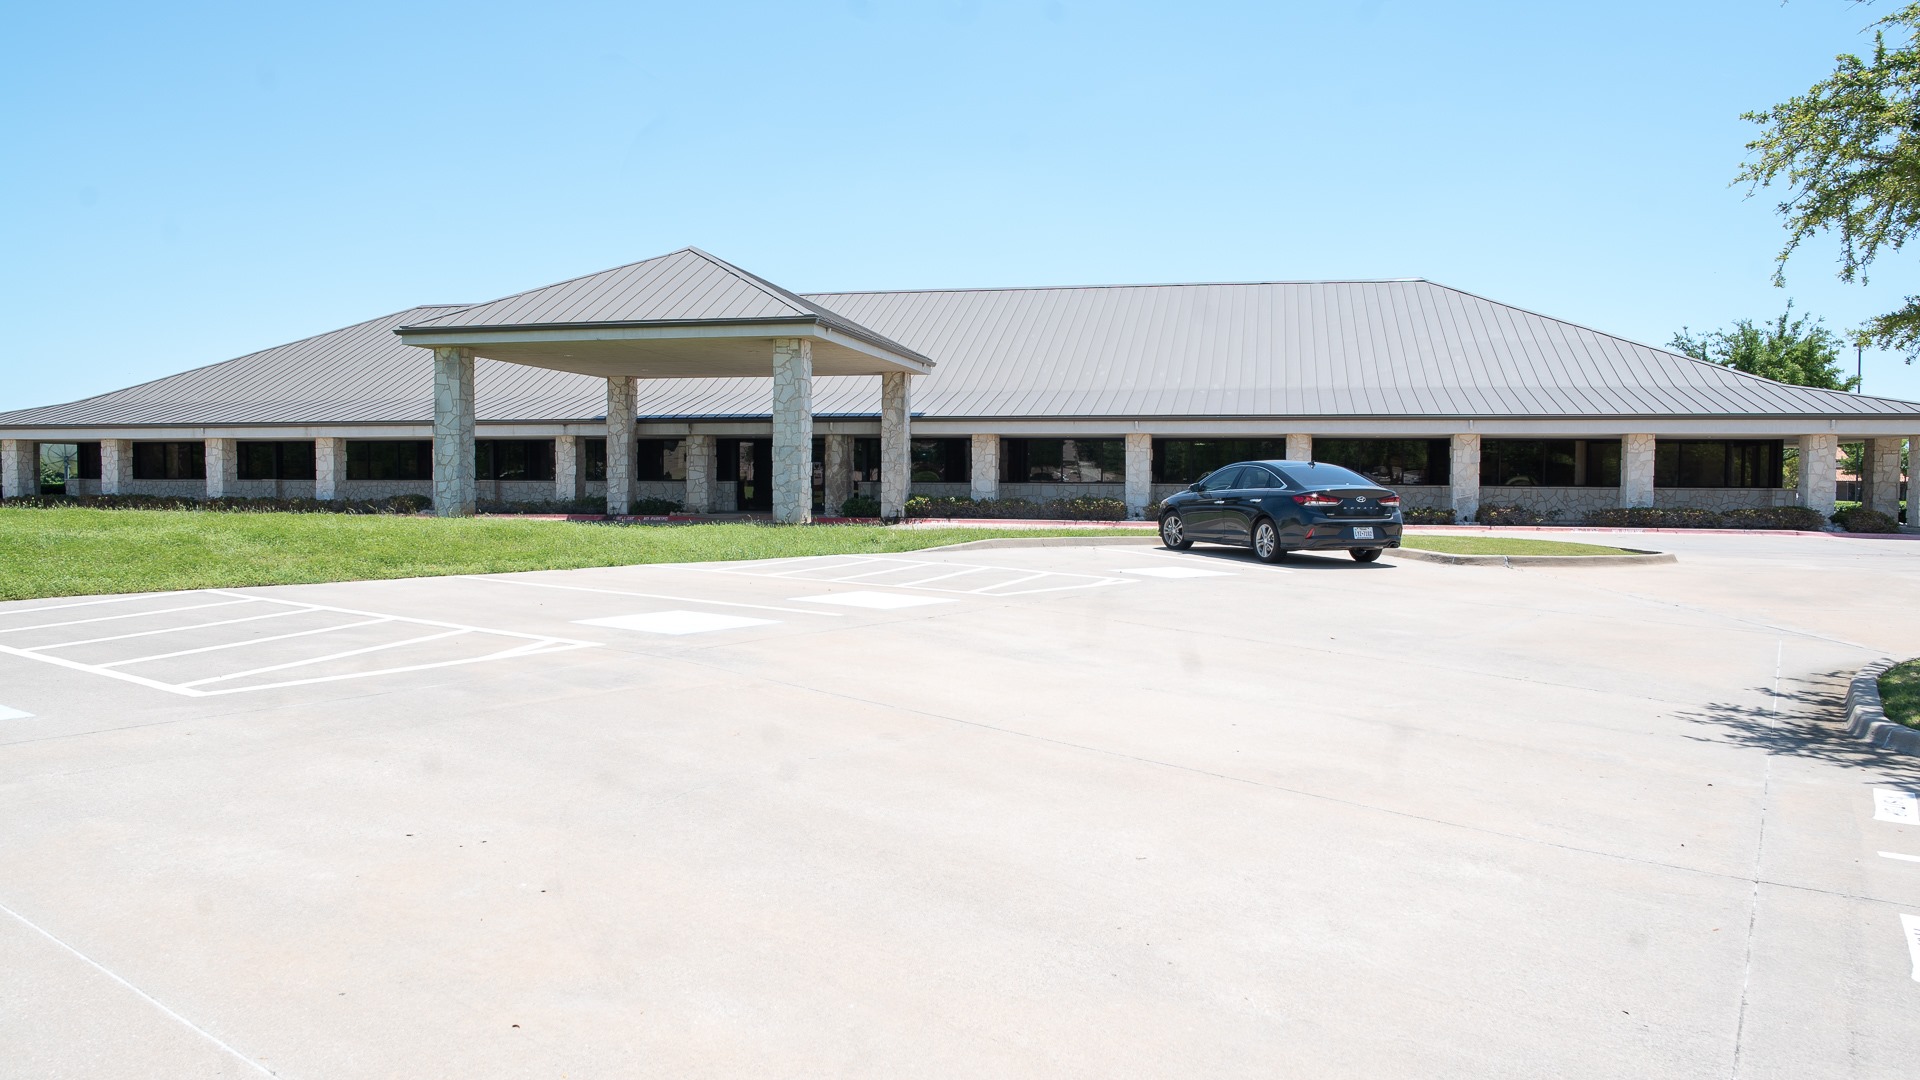 Point of Rental's new HQ is located in Fort Worth.